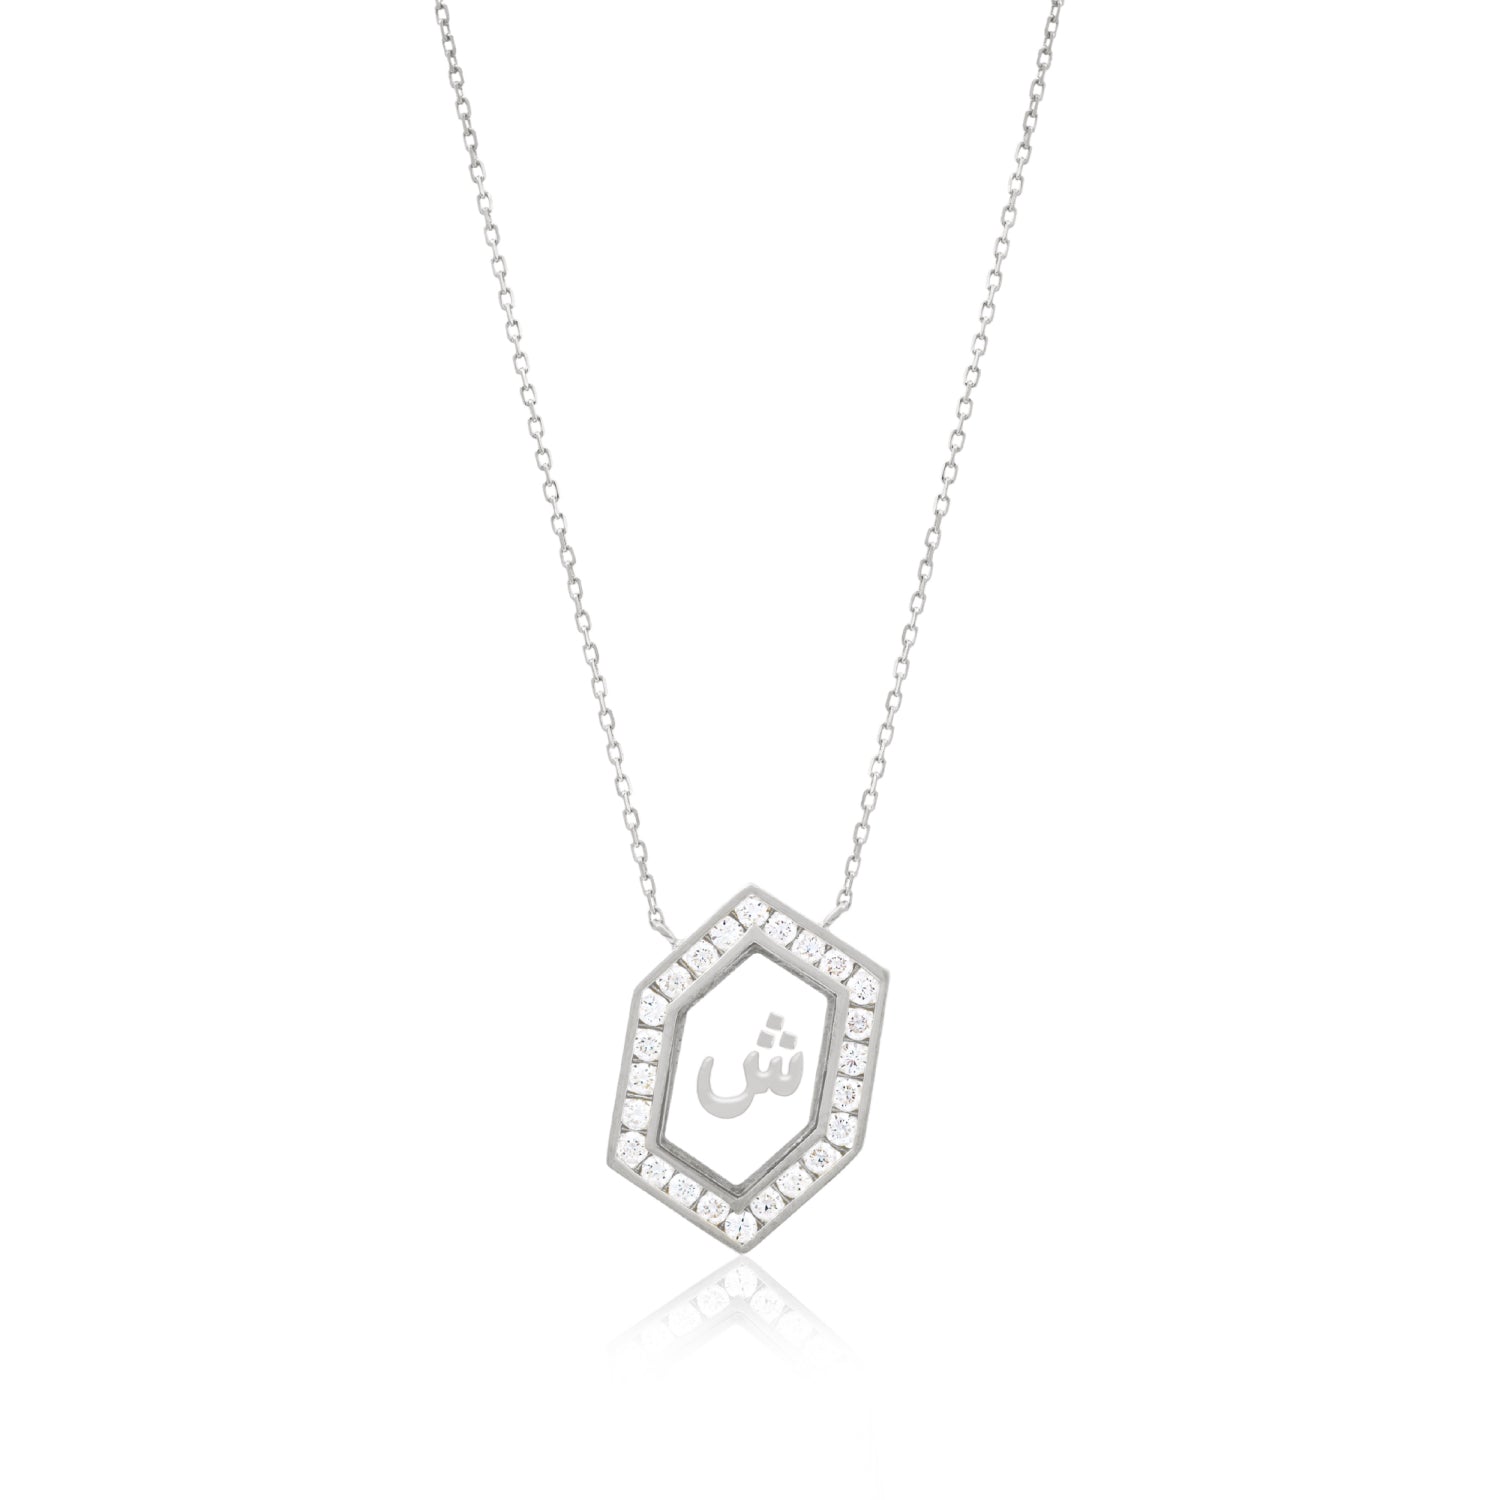 Qamoos 1.0 Letter ش Diamond Necklace in White Gold